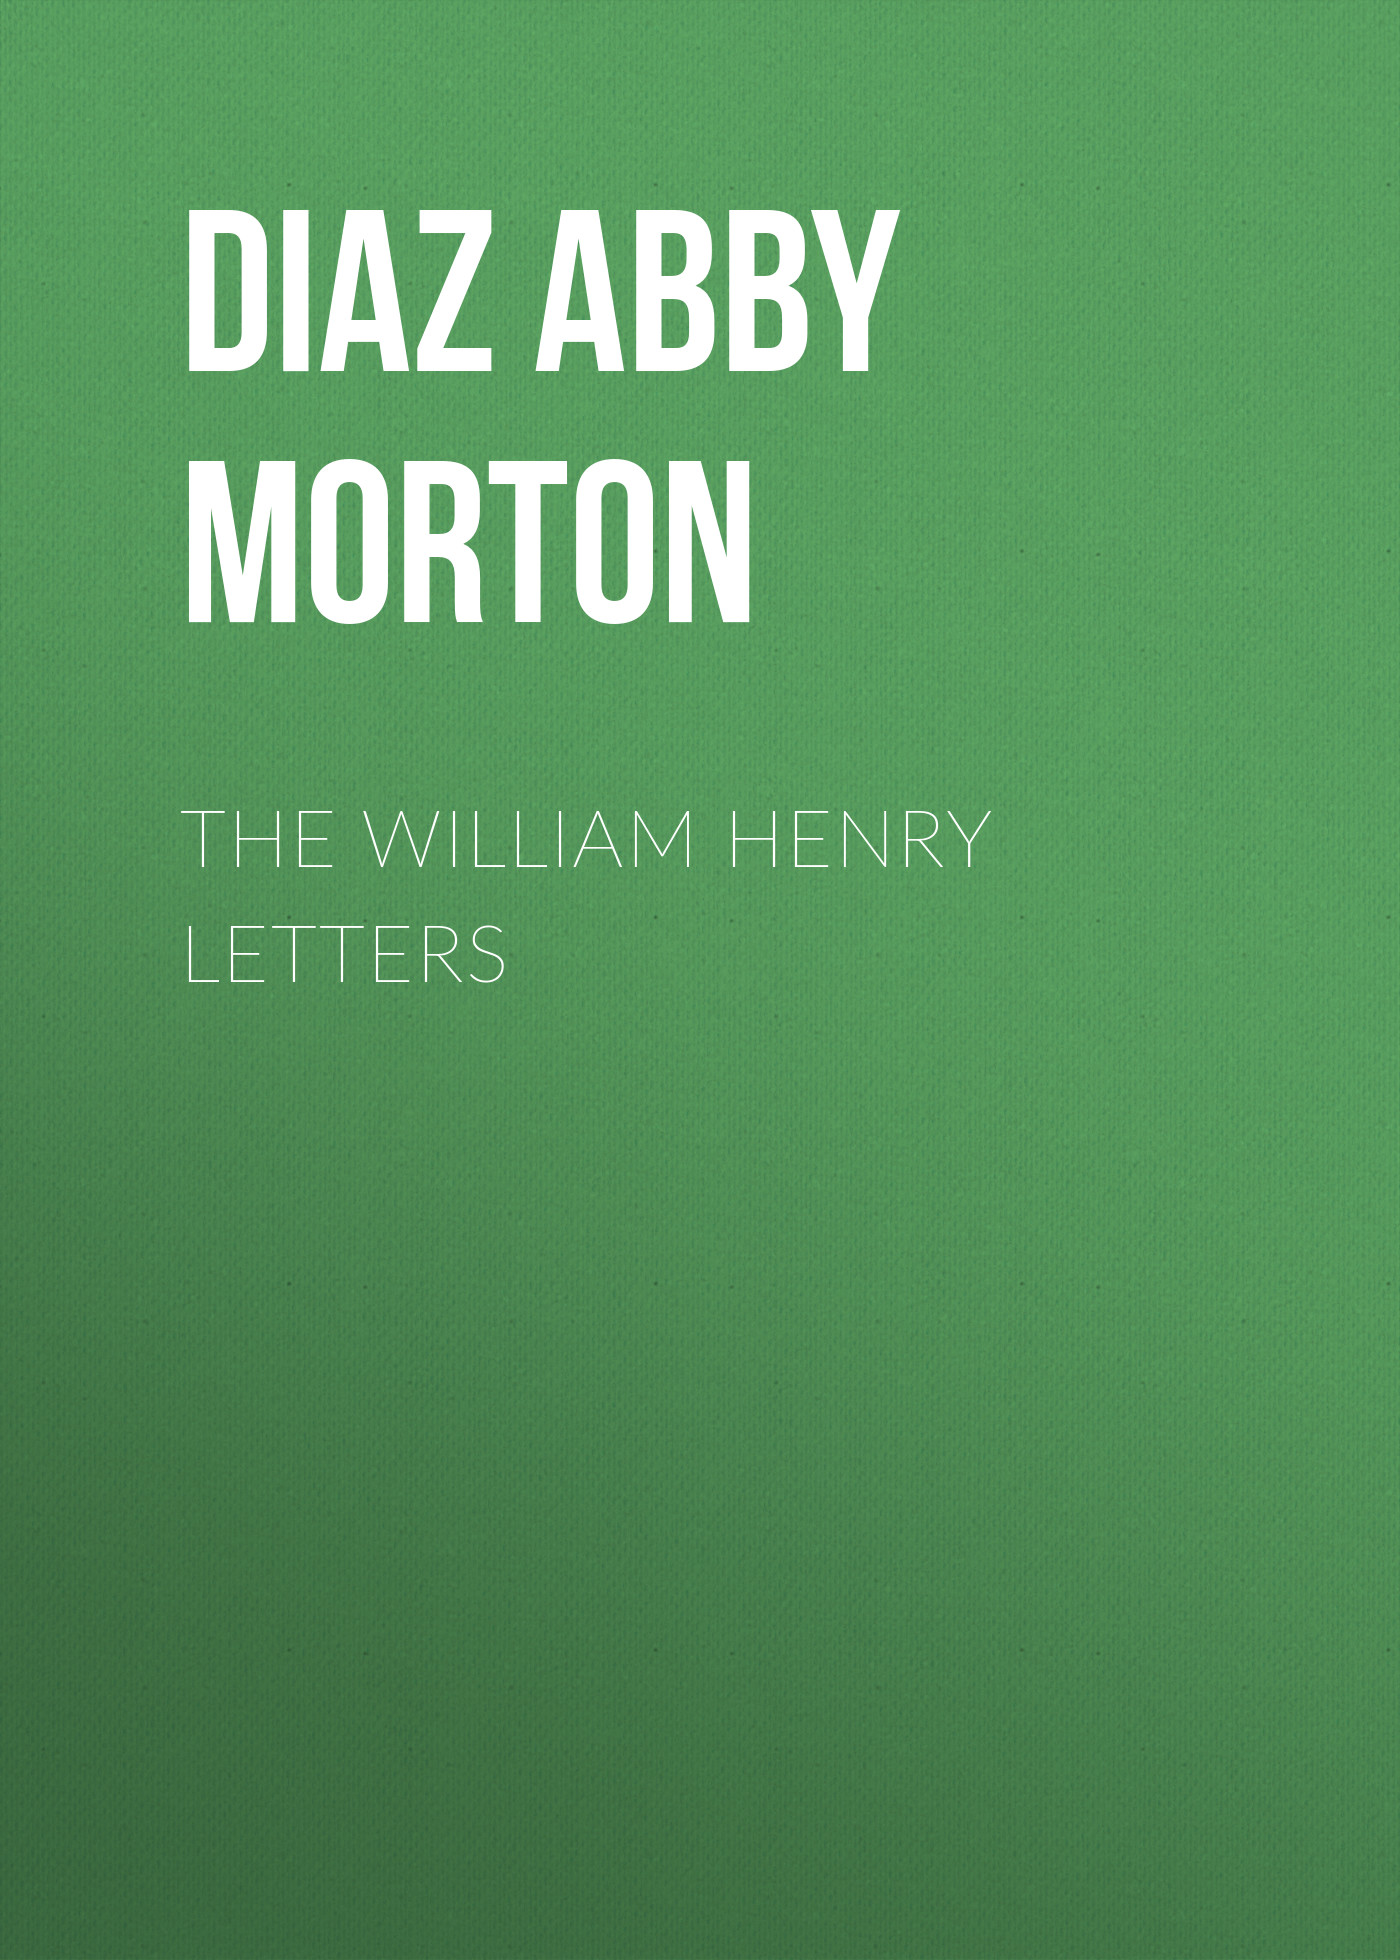 Diaz Abby Morton The William Henry Letters